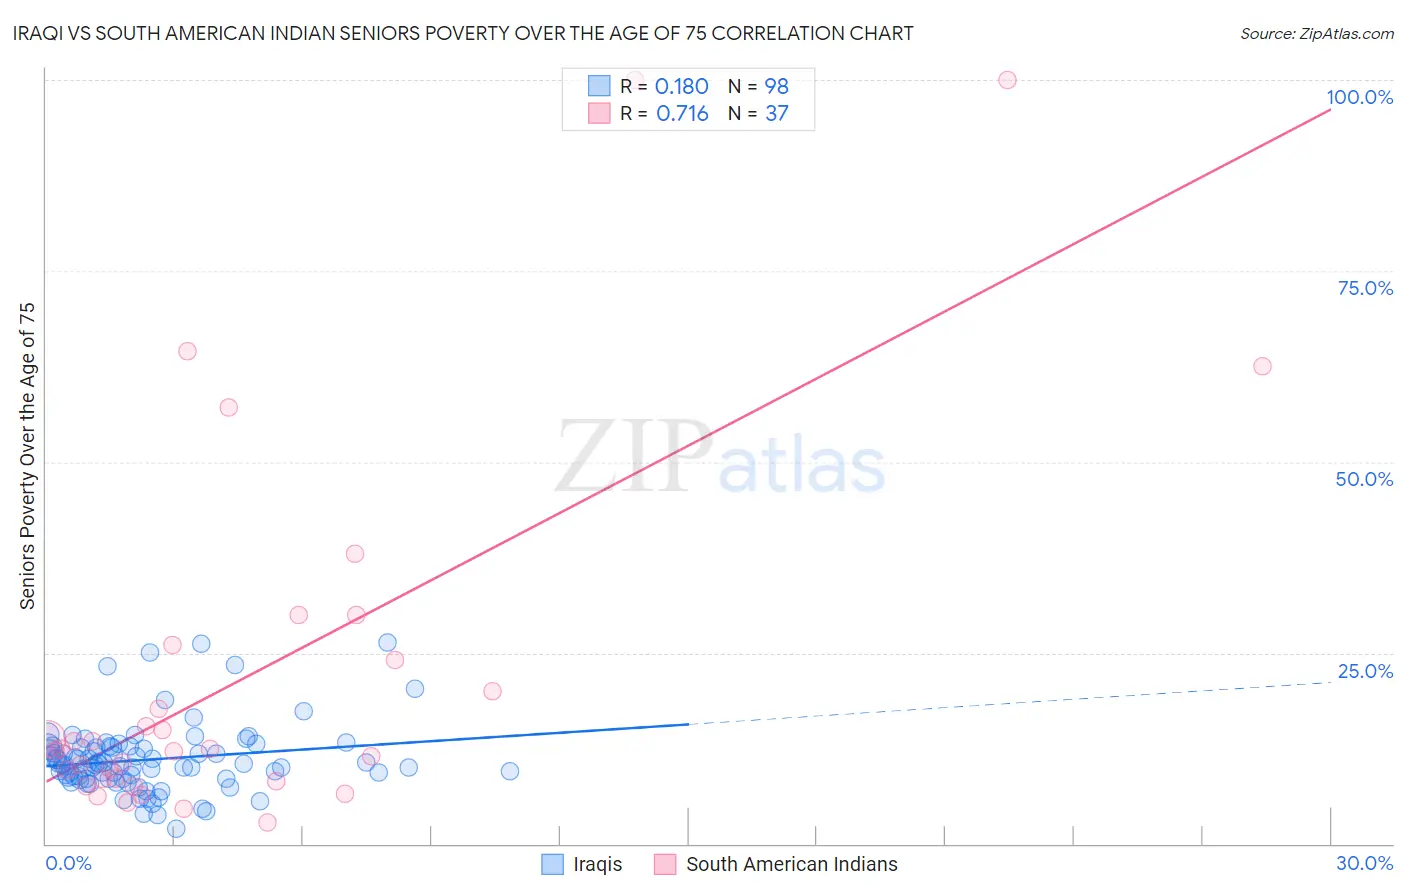 Iraqi vs South American Indian Seniors Poverty Over the Age of 75